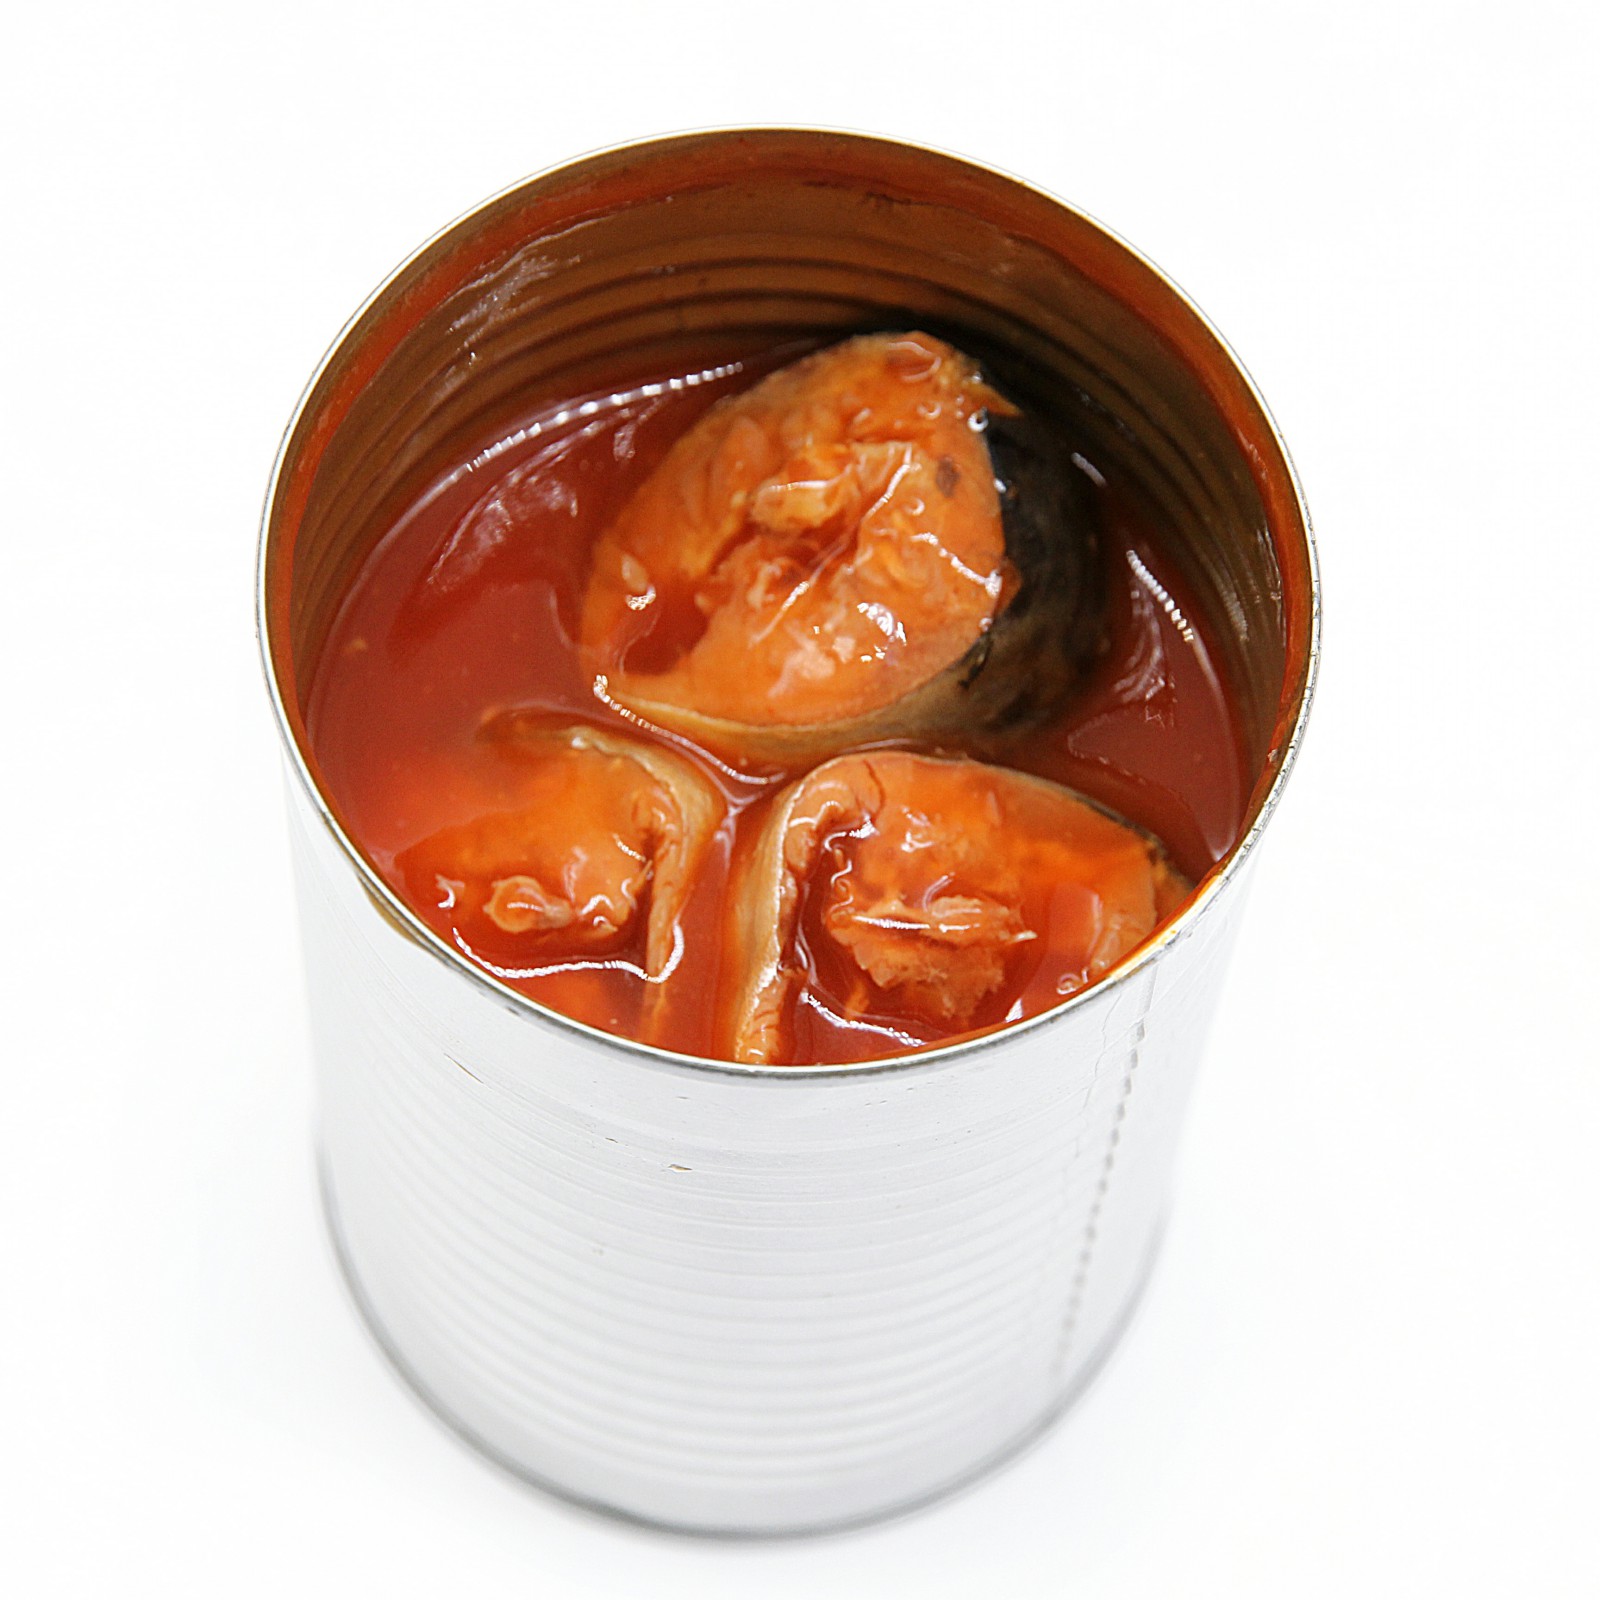 Canned sardine in tomato sauce 425g